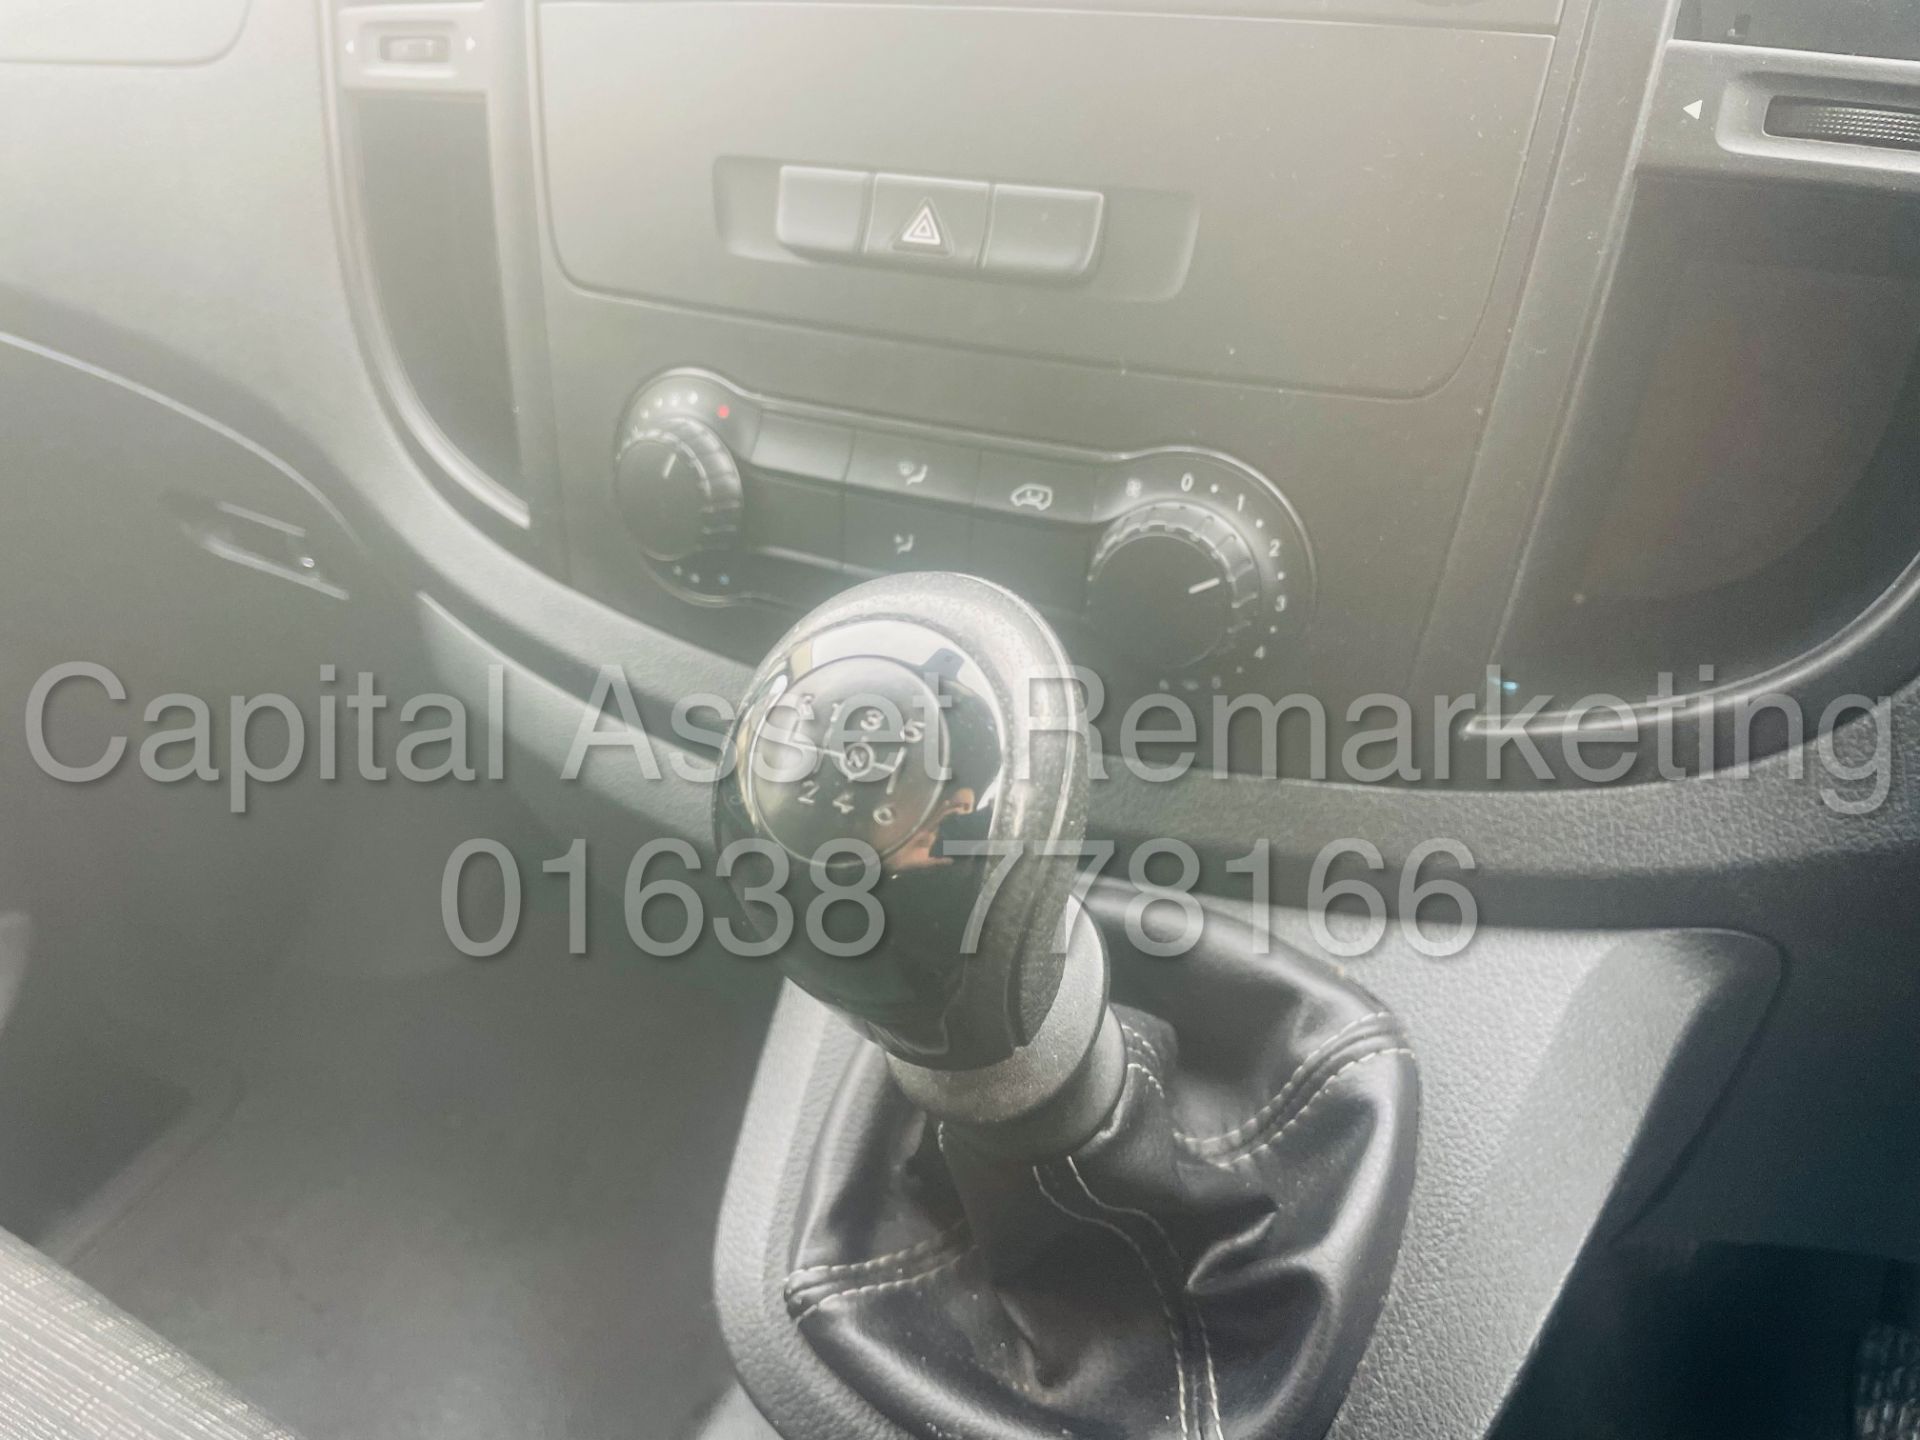 ON SALE MERCEDES-BENZ VITO CDI *LWB - PANEL VAN* (2018 - EURO 6) '6 SPEED - CRUISE CONTROL (1 OWNER) - Image 38 of 43